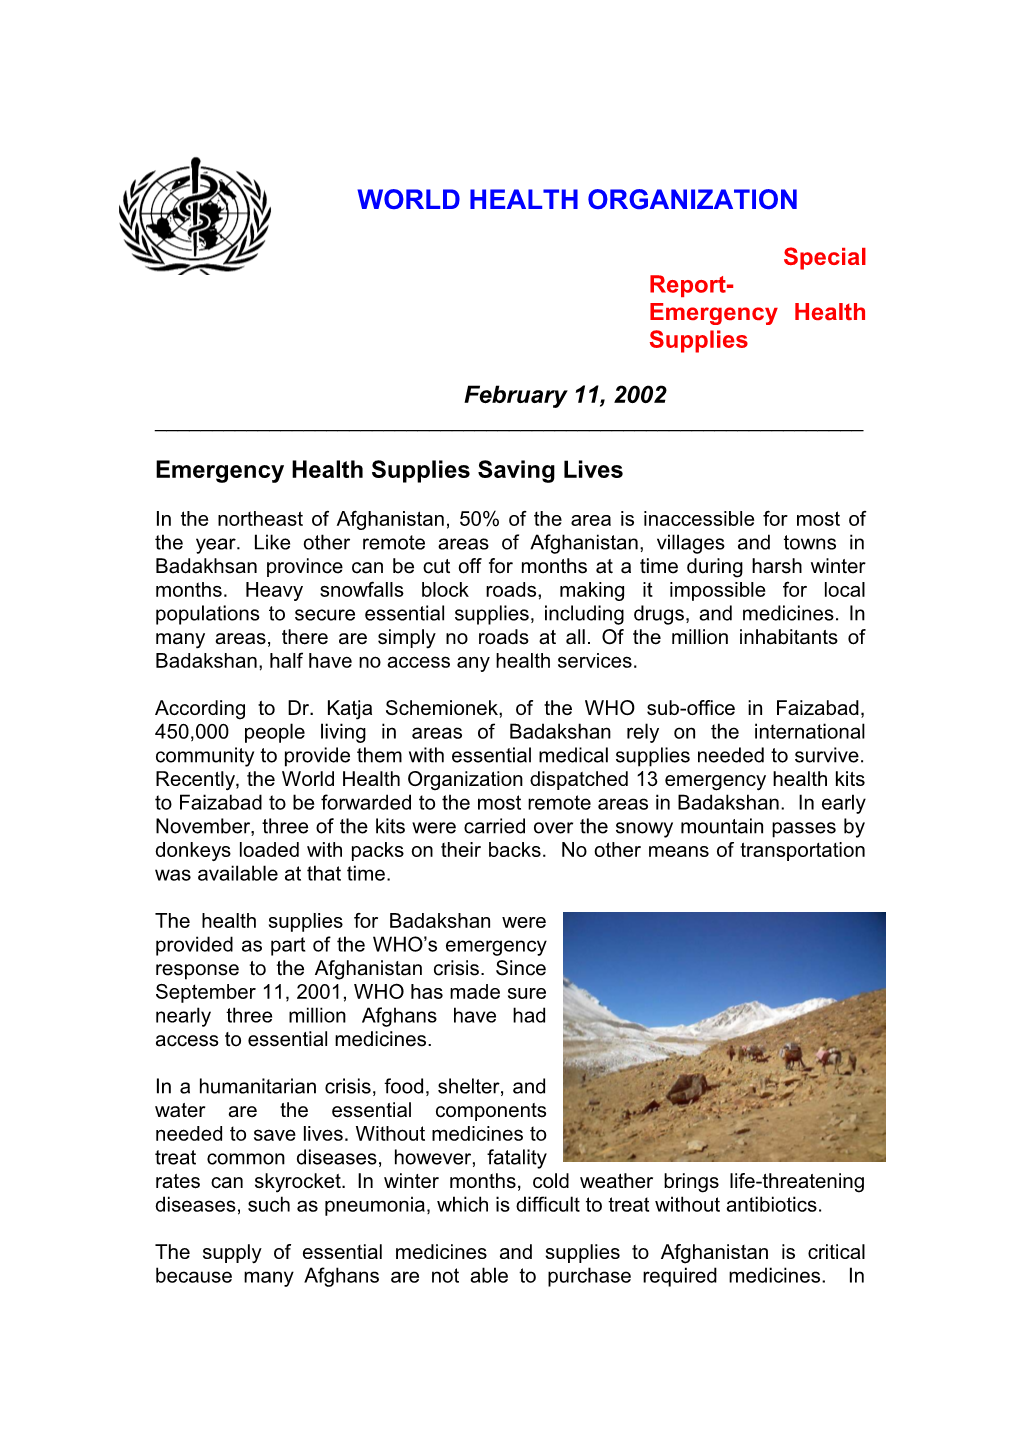 Special Report- Emergency Health Supplies